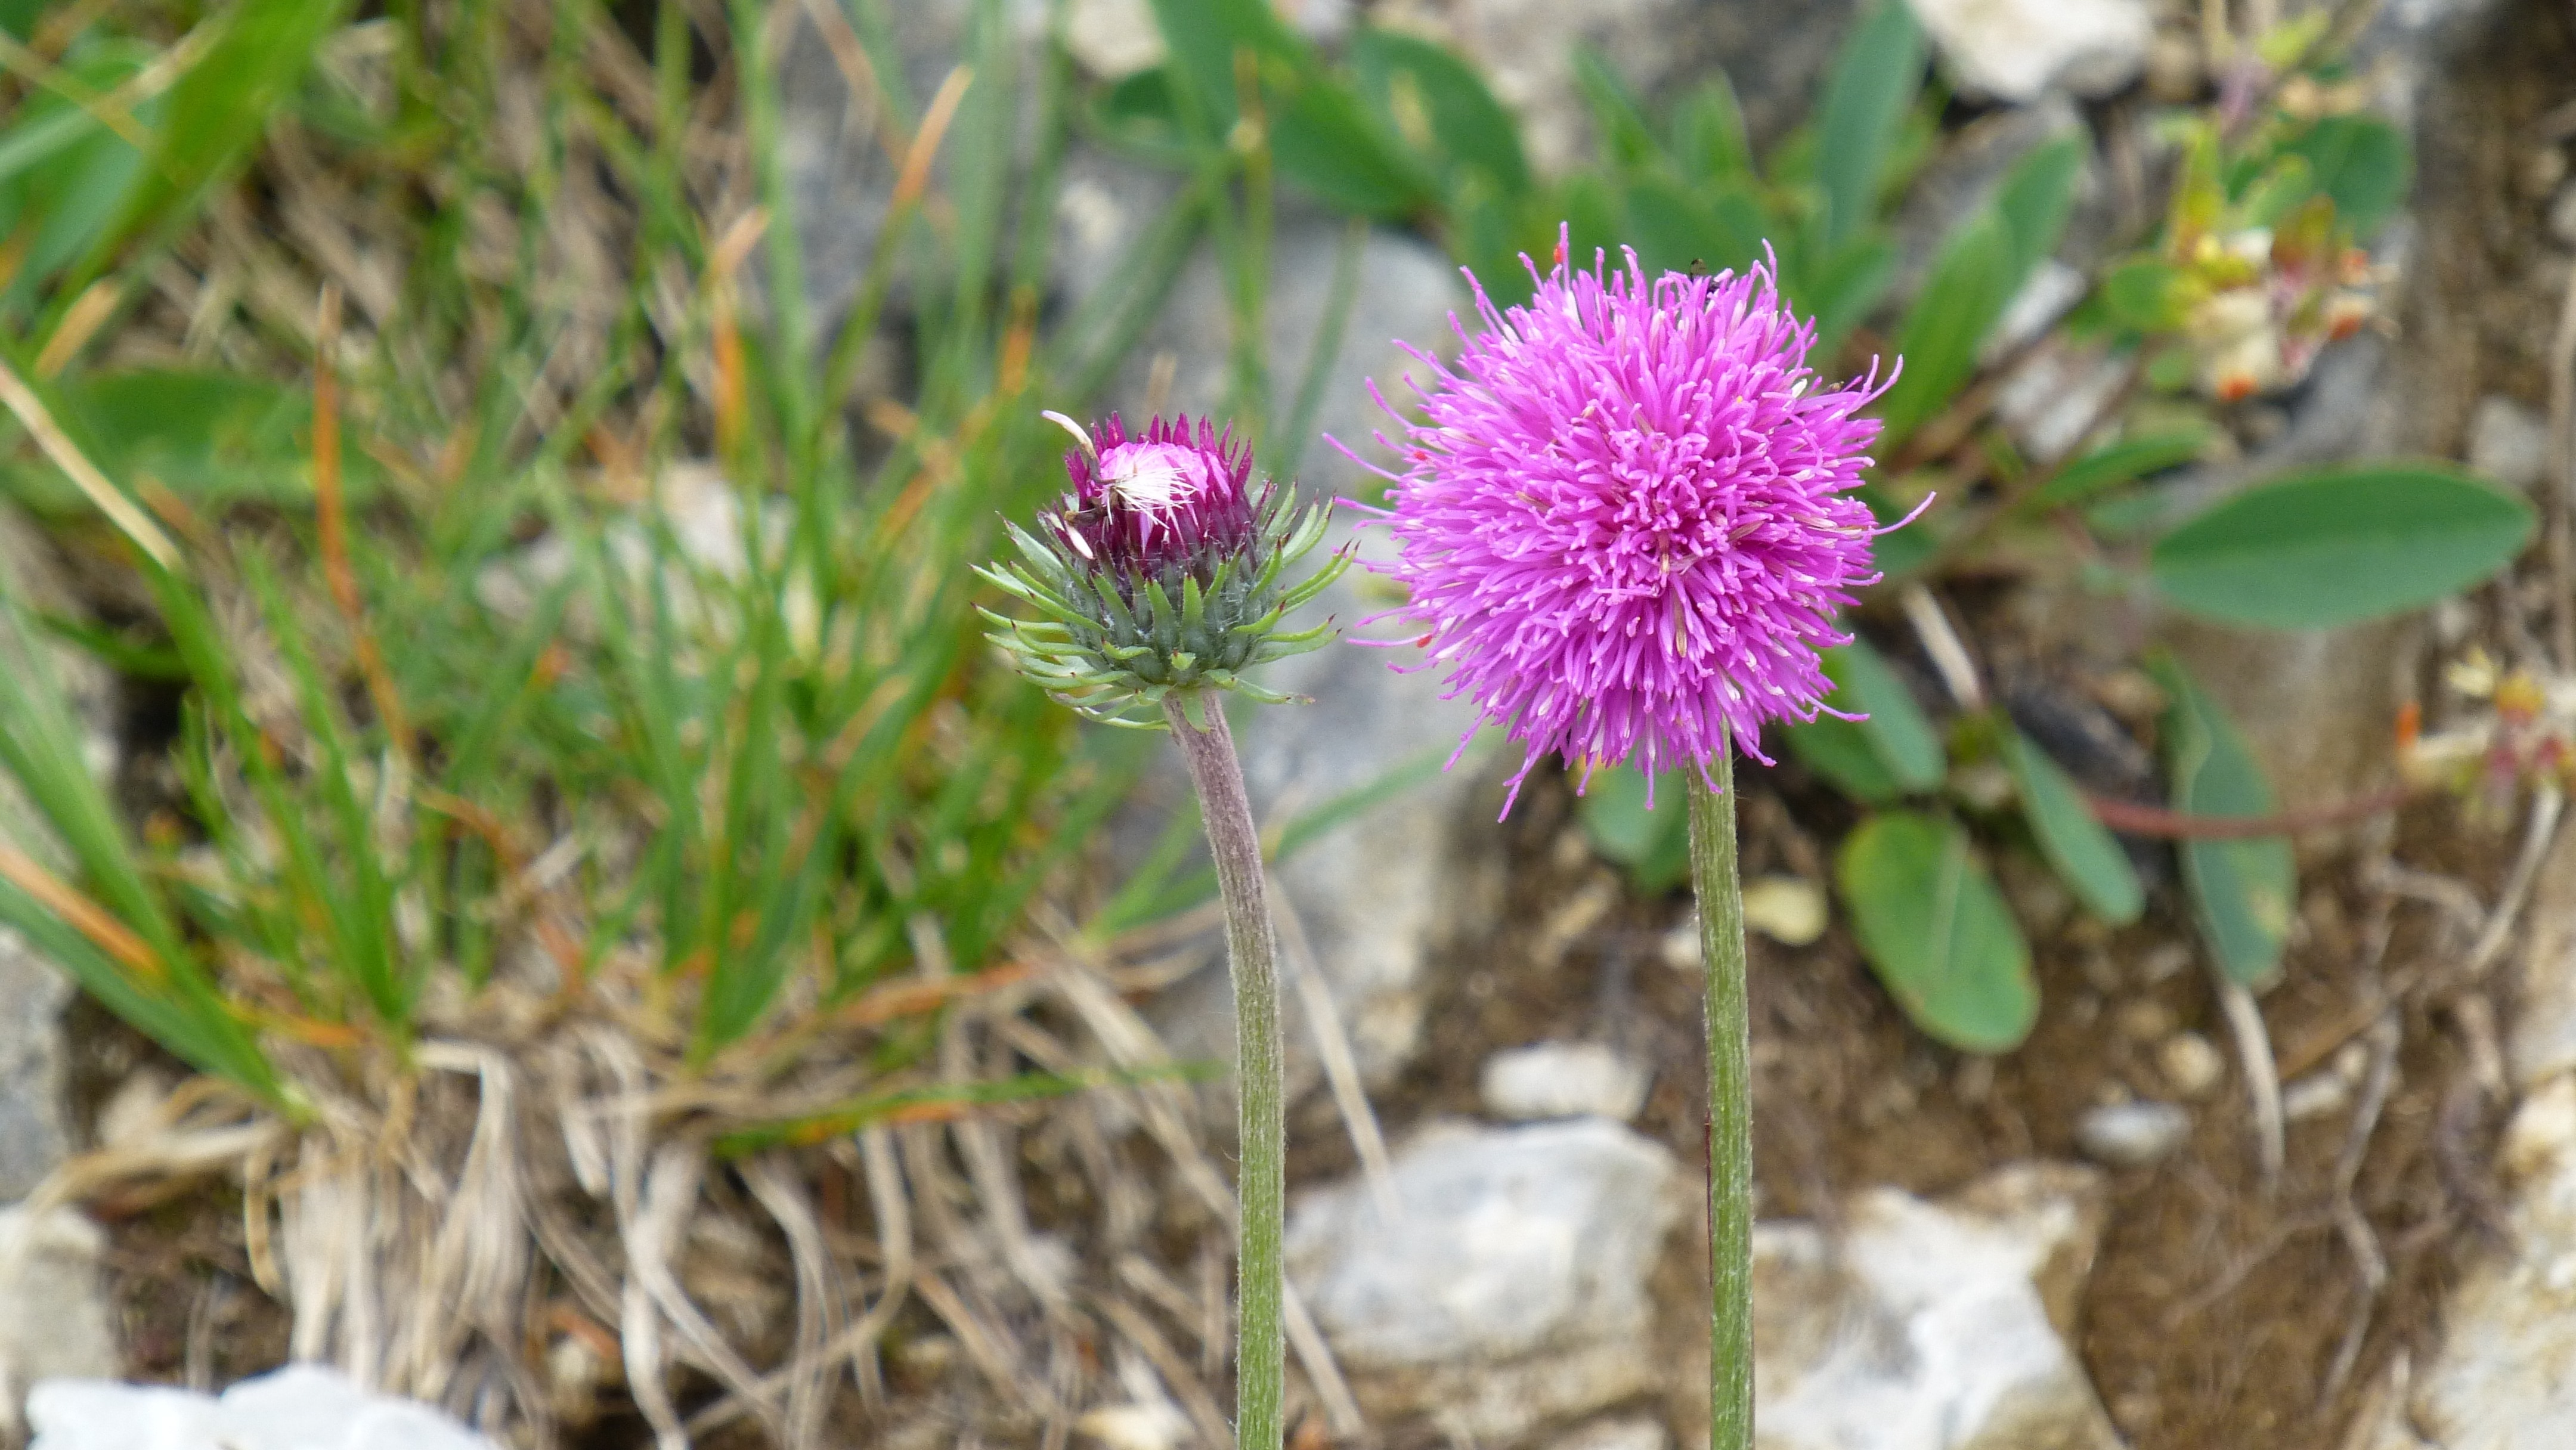 pink and white dandelion flower